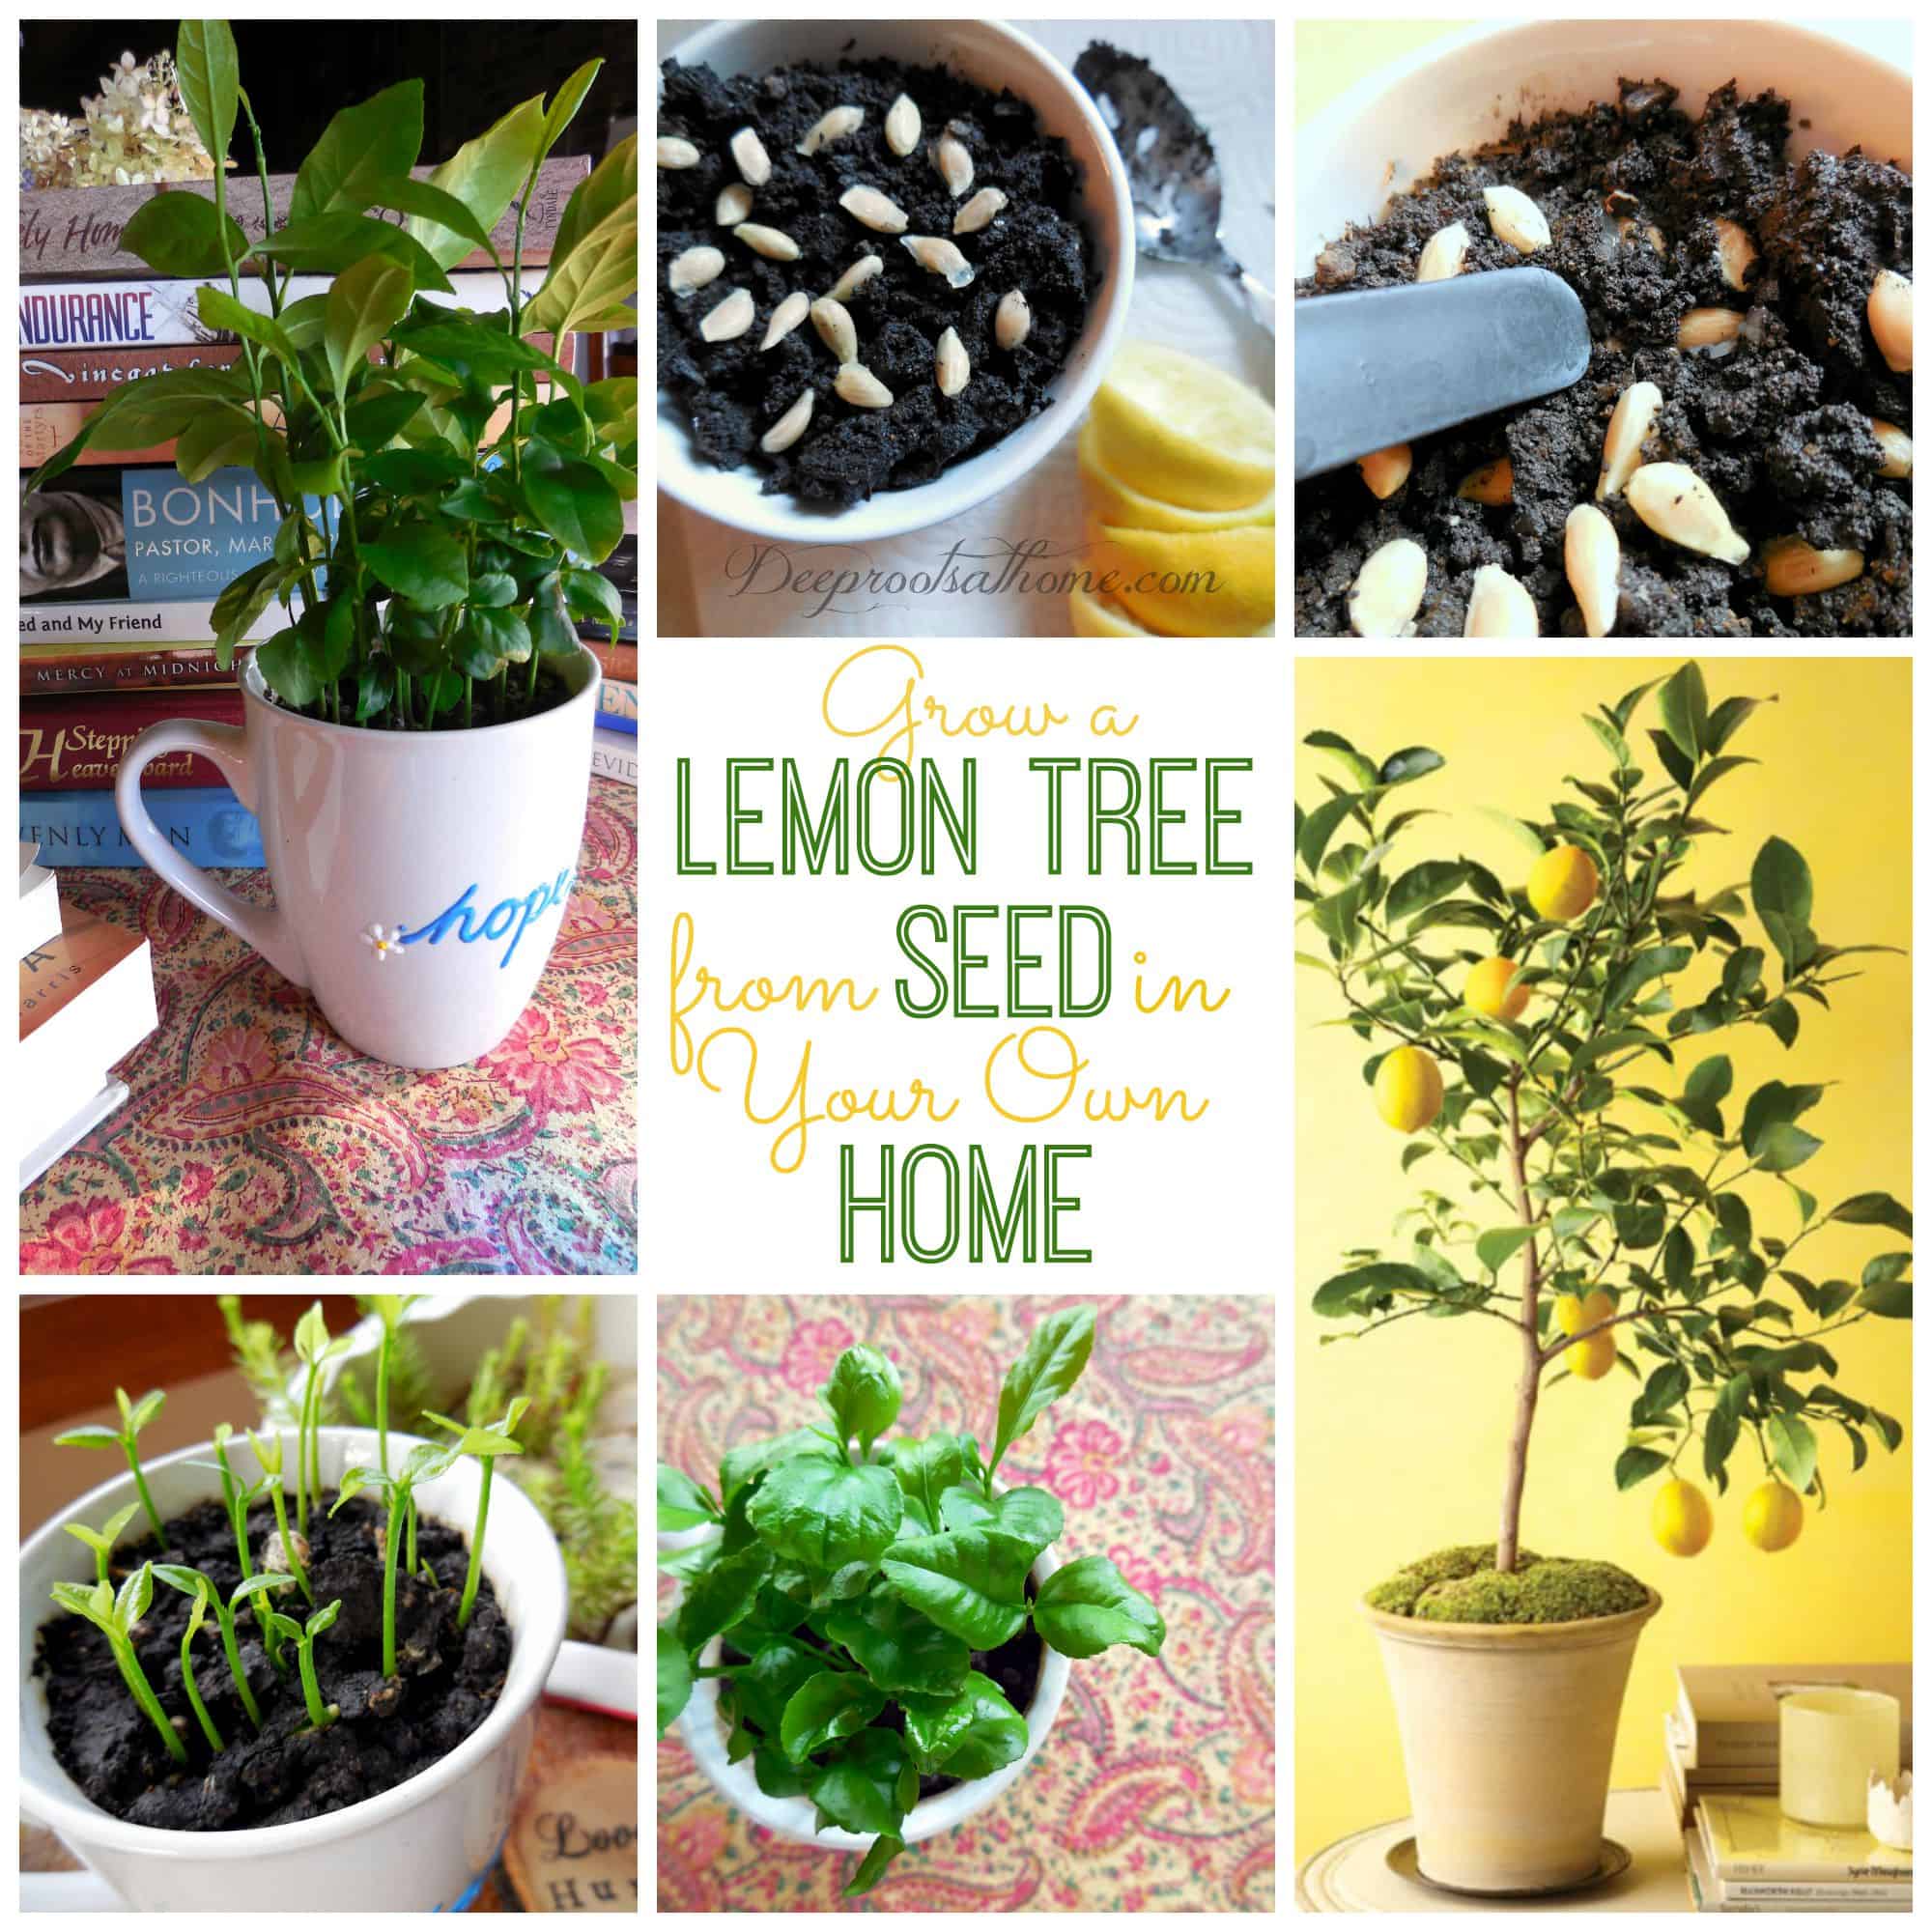 Grow a Lemon Tree from Seed in Your Own Home, a citrus tree collage